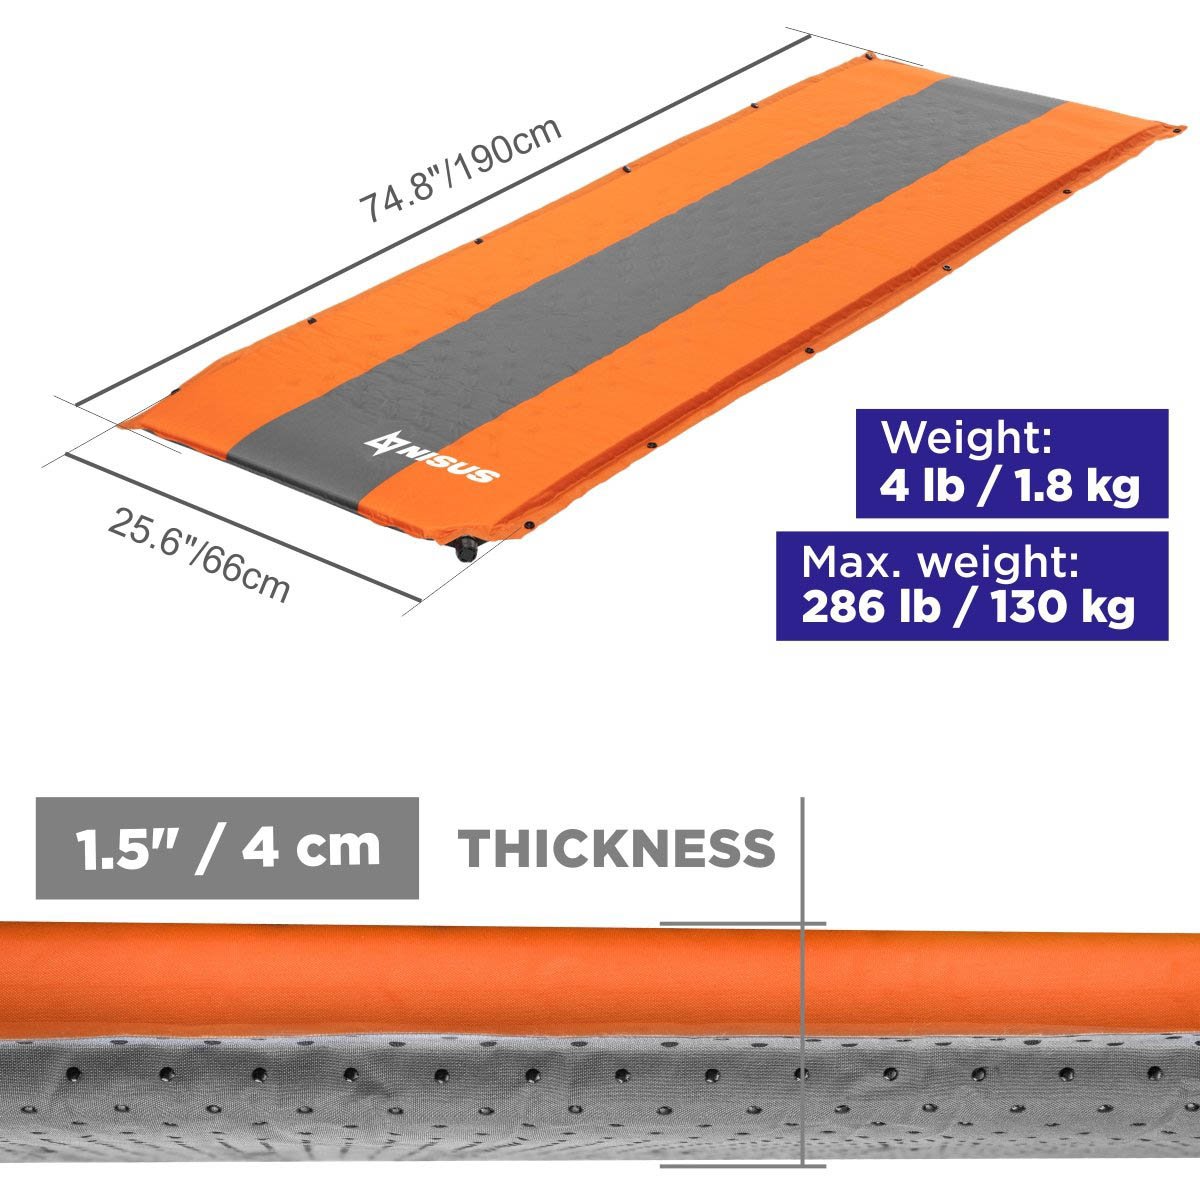 78" long, 25.6" wide, 1.5" thick Orange Self Inflating Sleeping Pad carries up to 286 lbs and weighs only 4 lbs